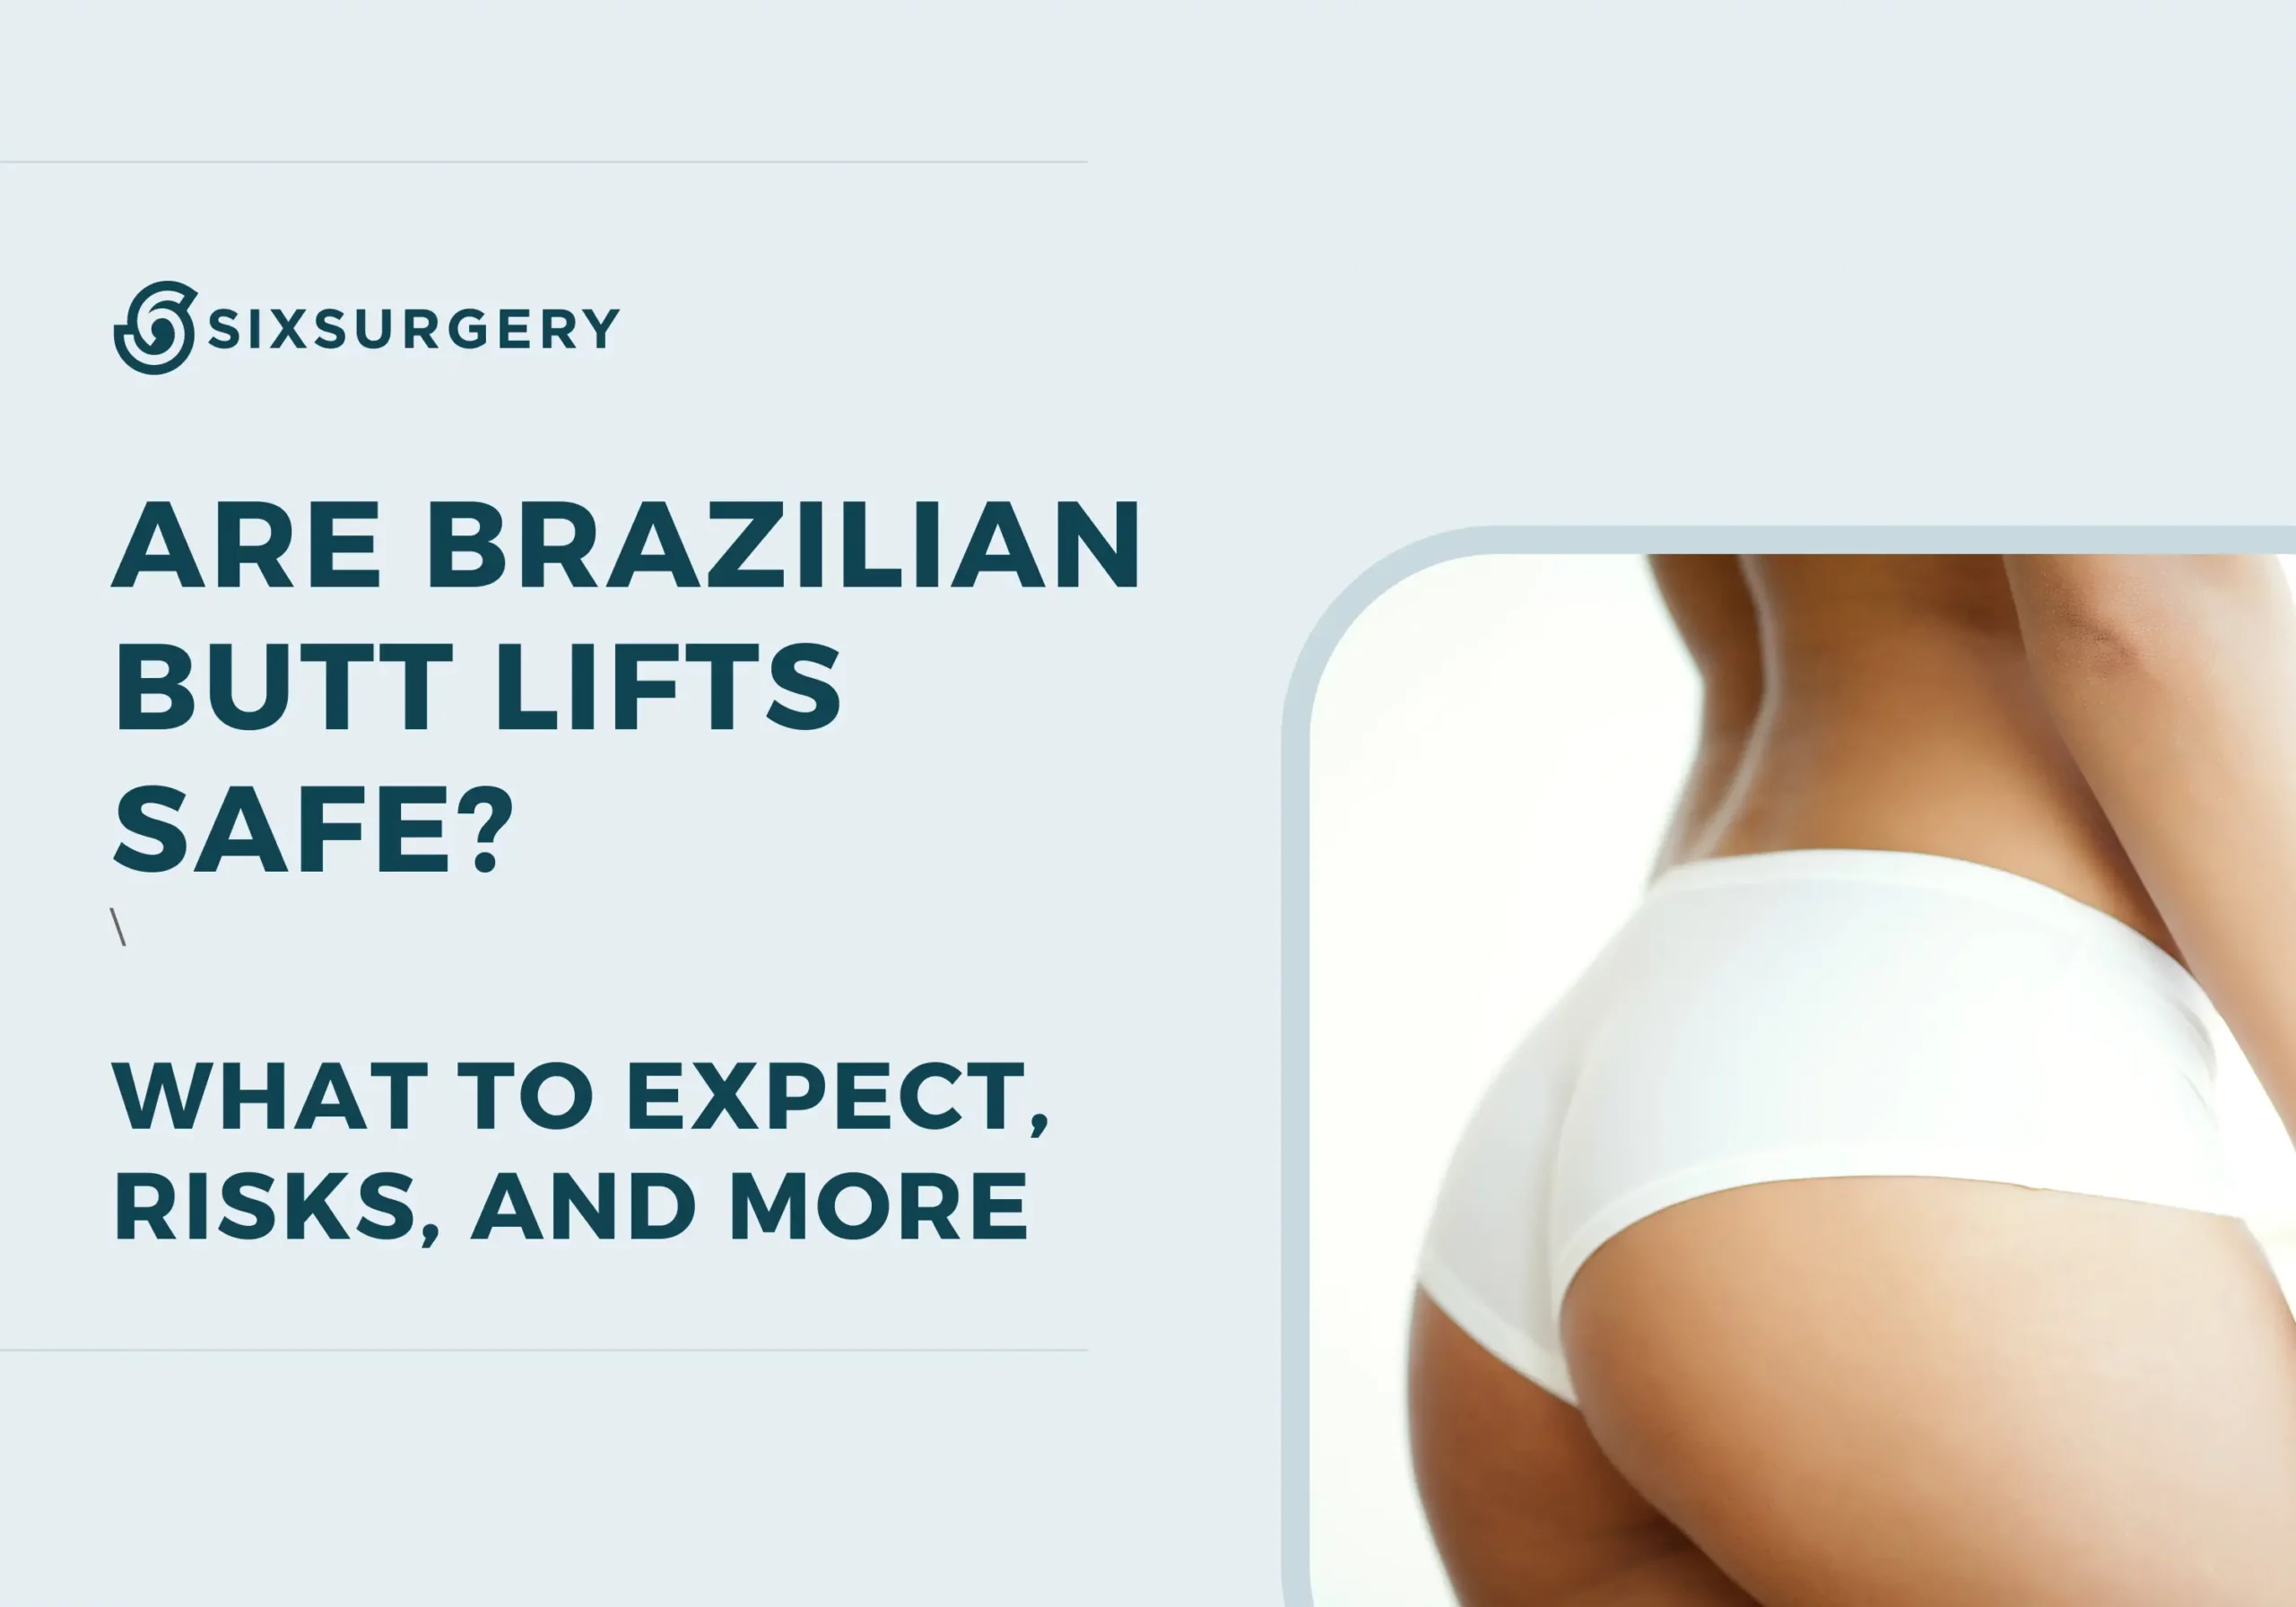 Are Brazilian Butt Lifts Safe? What to Expect, Risks, and More